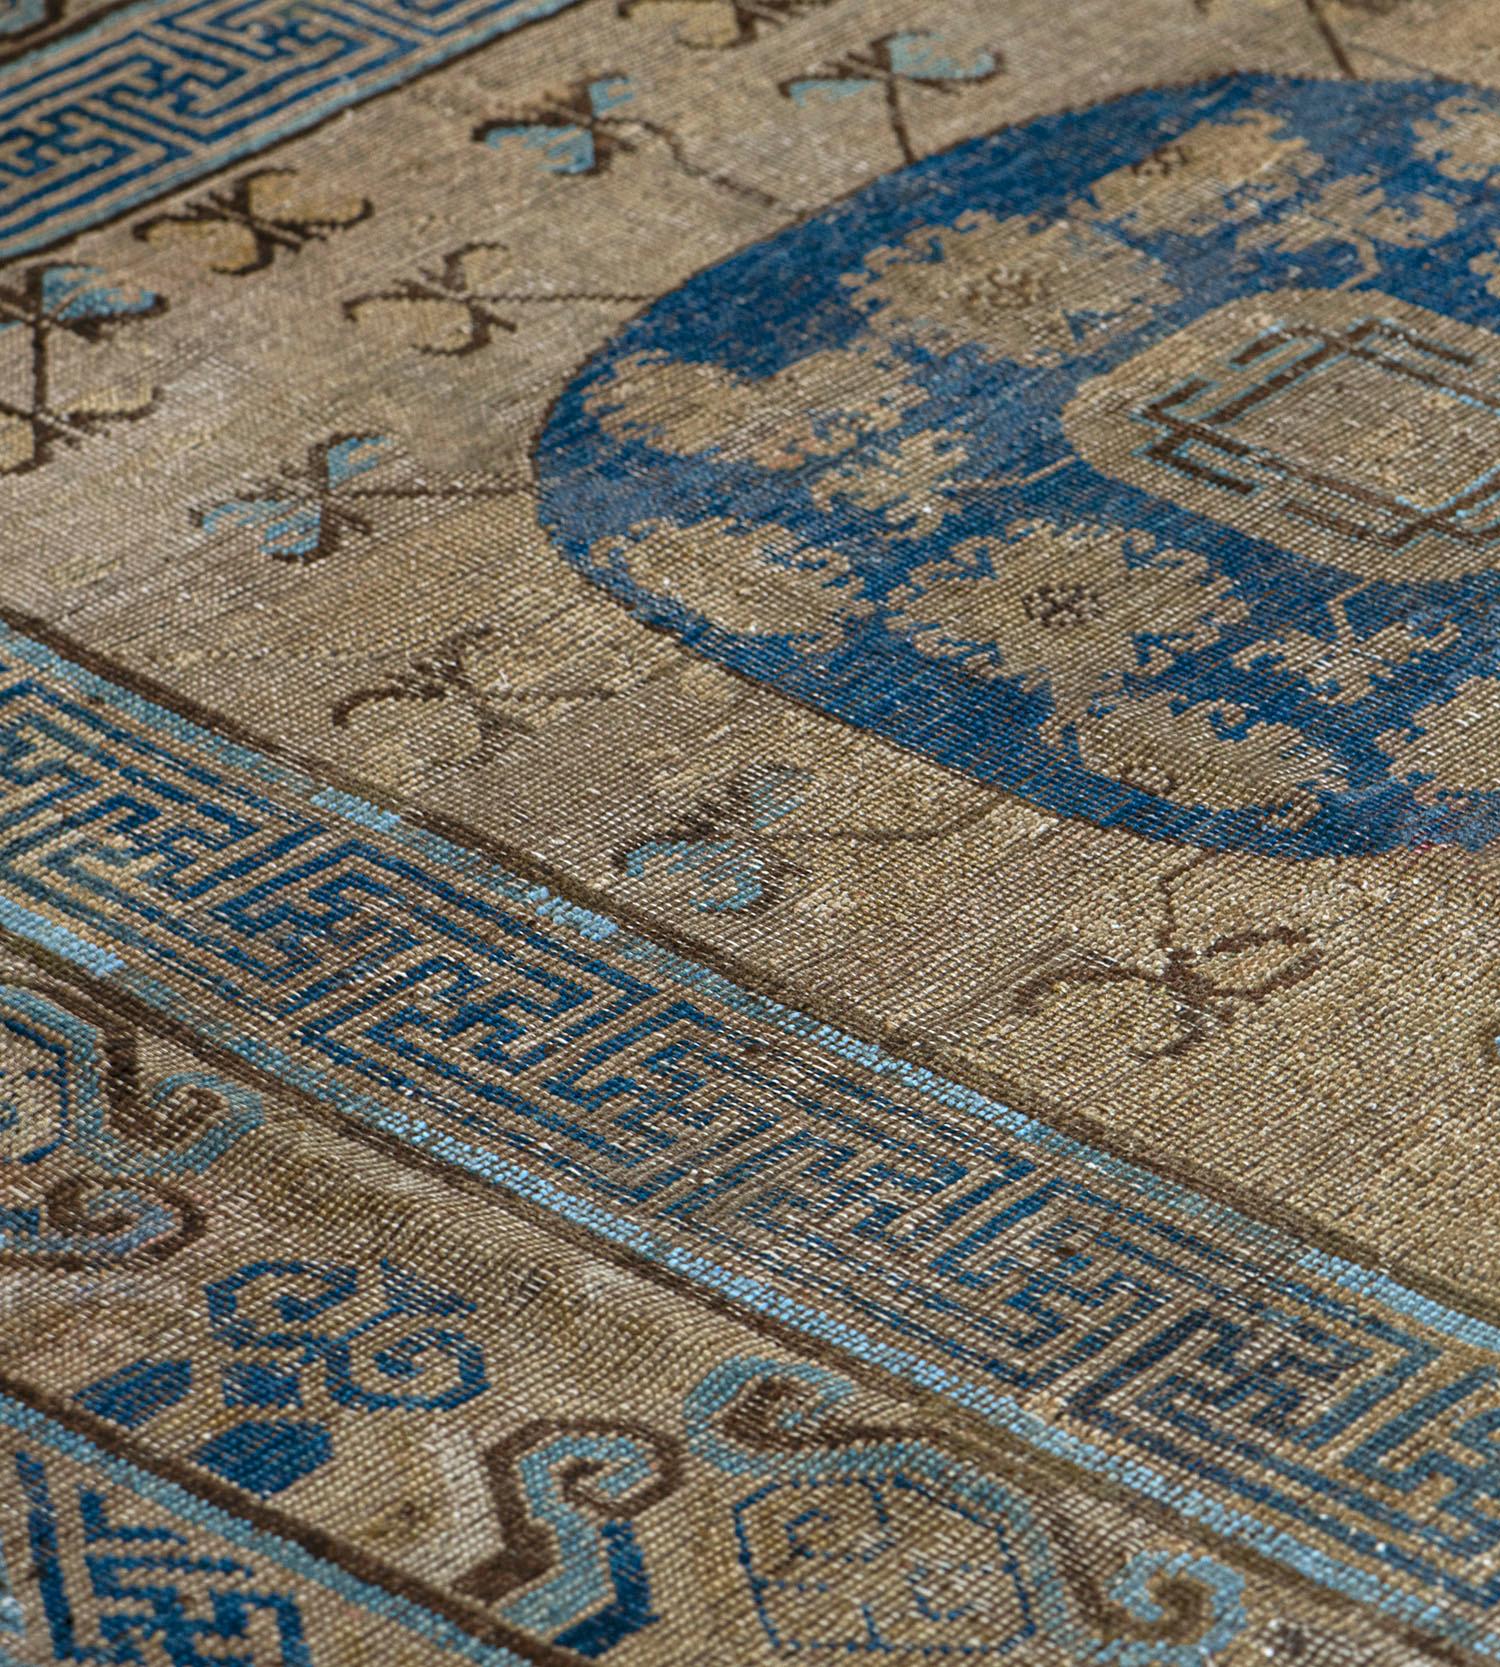 This antique Khotan rug has a dusty sandy-brown field scattered with delicate light blue and golden-yellow delicate flowerhead stems around a column of three royal-blue roundels each containing angular flowerheads and floral vine around a central